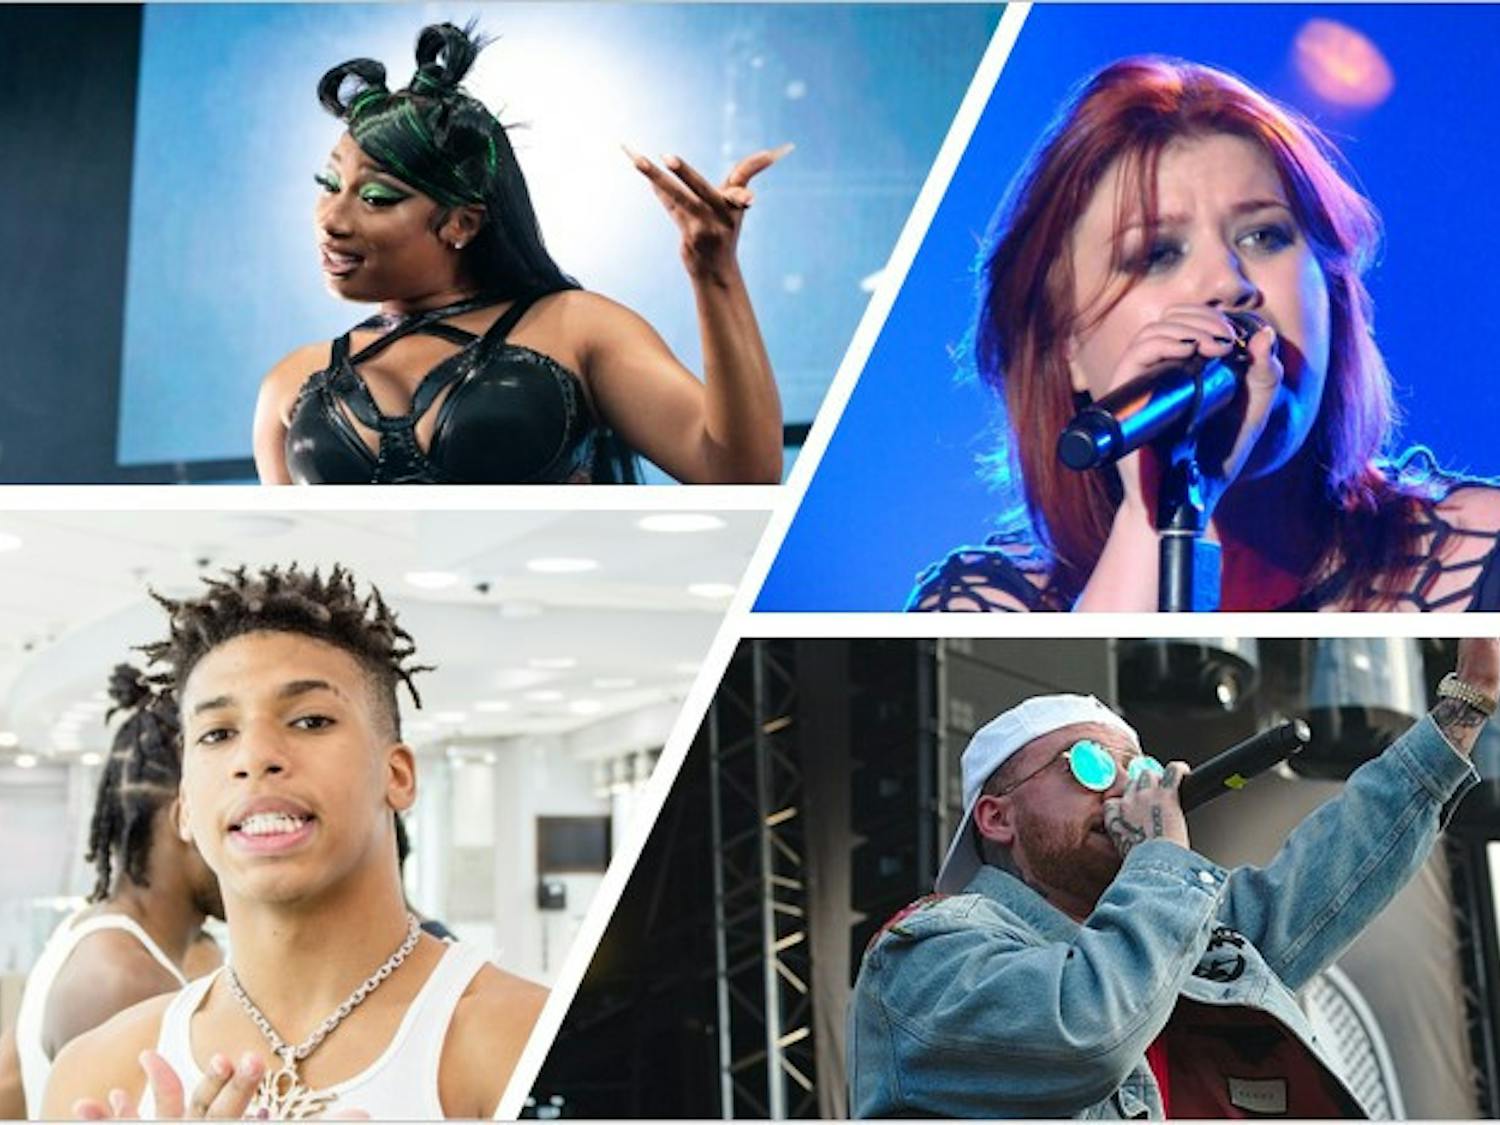 Students named songs by Megan Thee Stallion (top left), Kelly Clarkson (top right), NLE Choppa (bottom left) and Mac Miller (bottom right) as their pregame favorites.&nbsp;